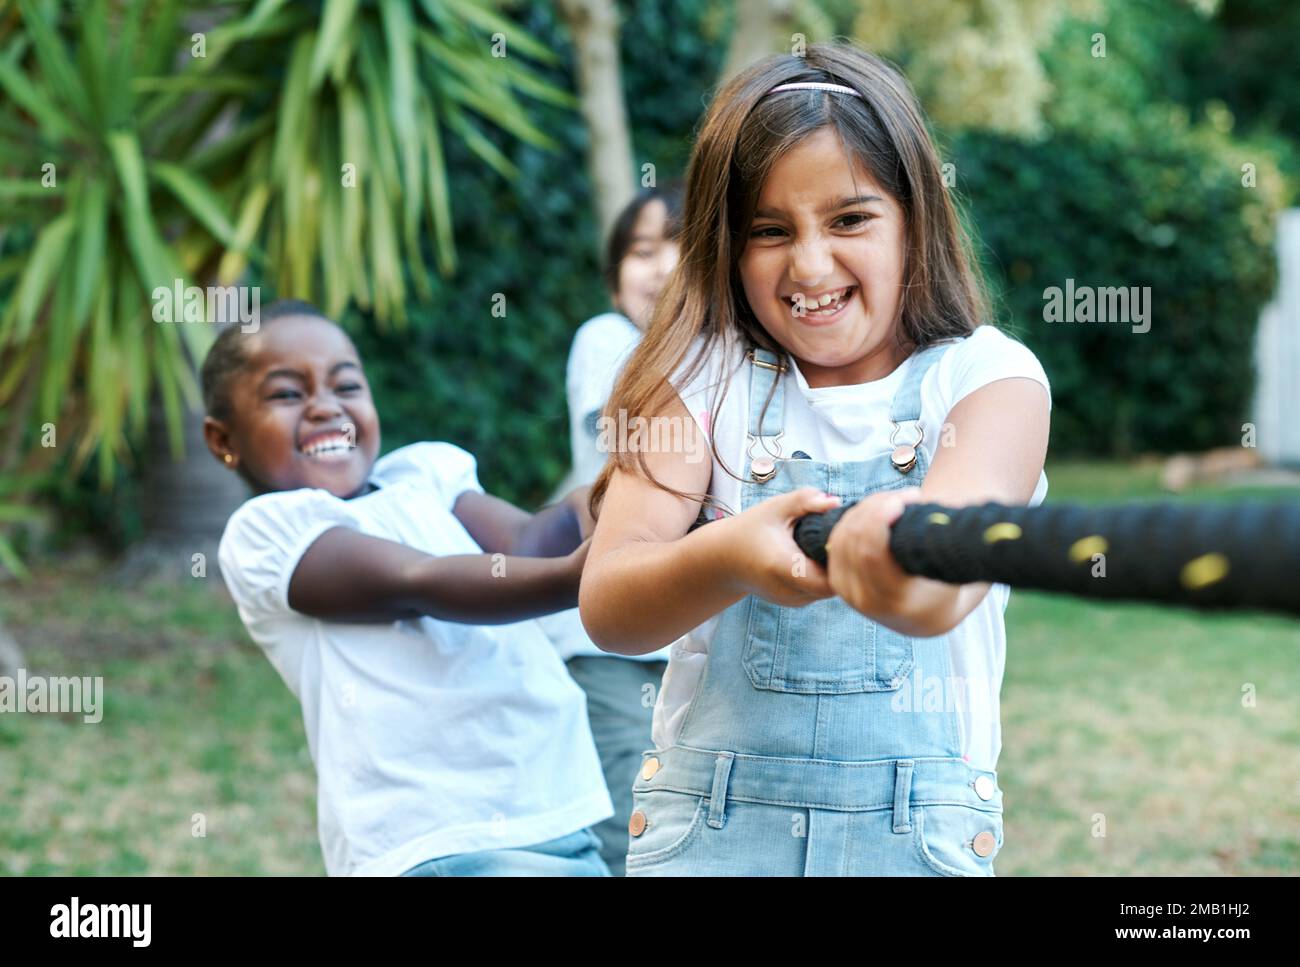 Im on the winning team. children playing tug of war together outside. Stock Photo